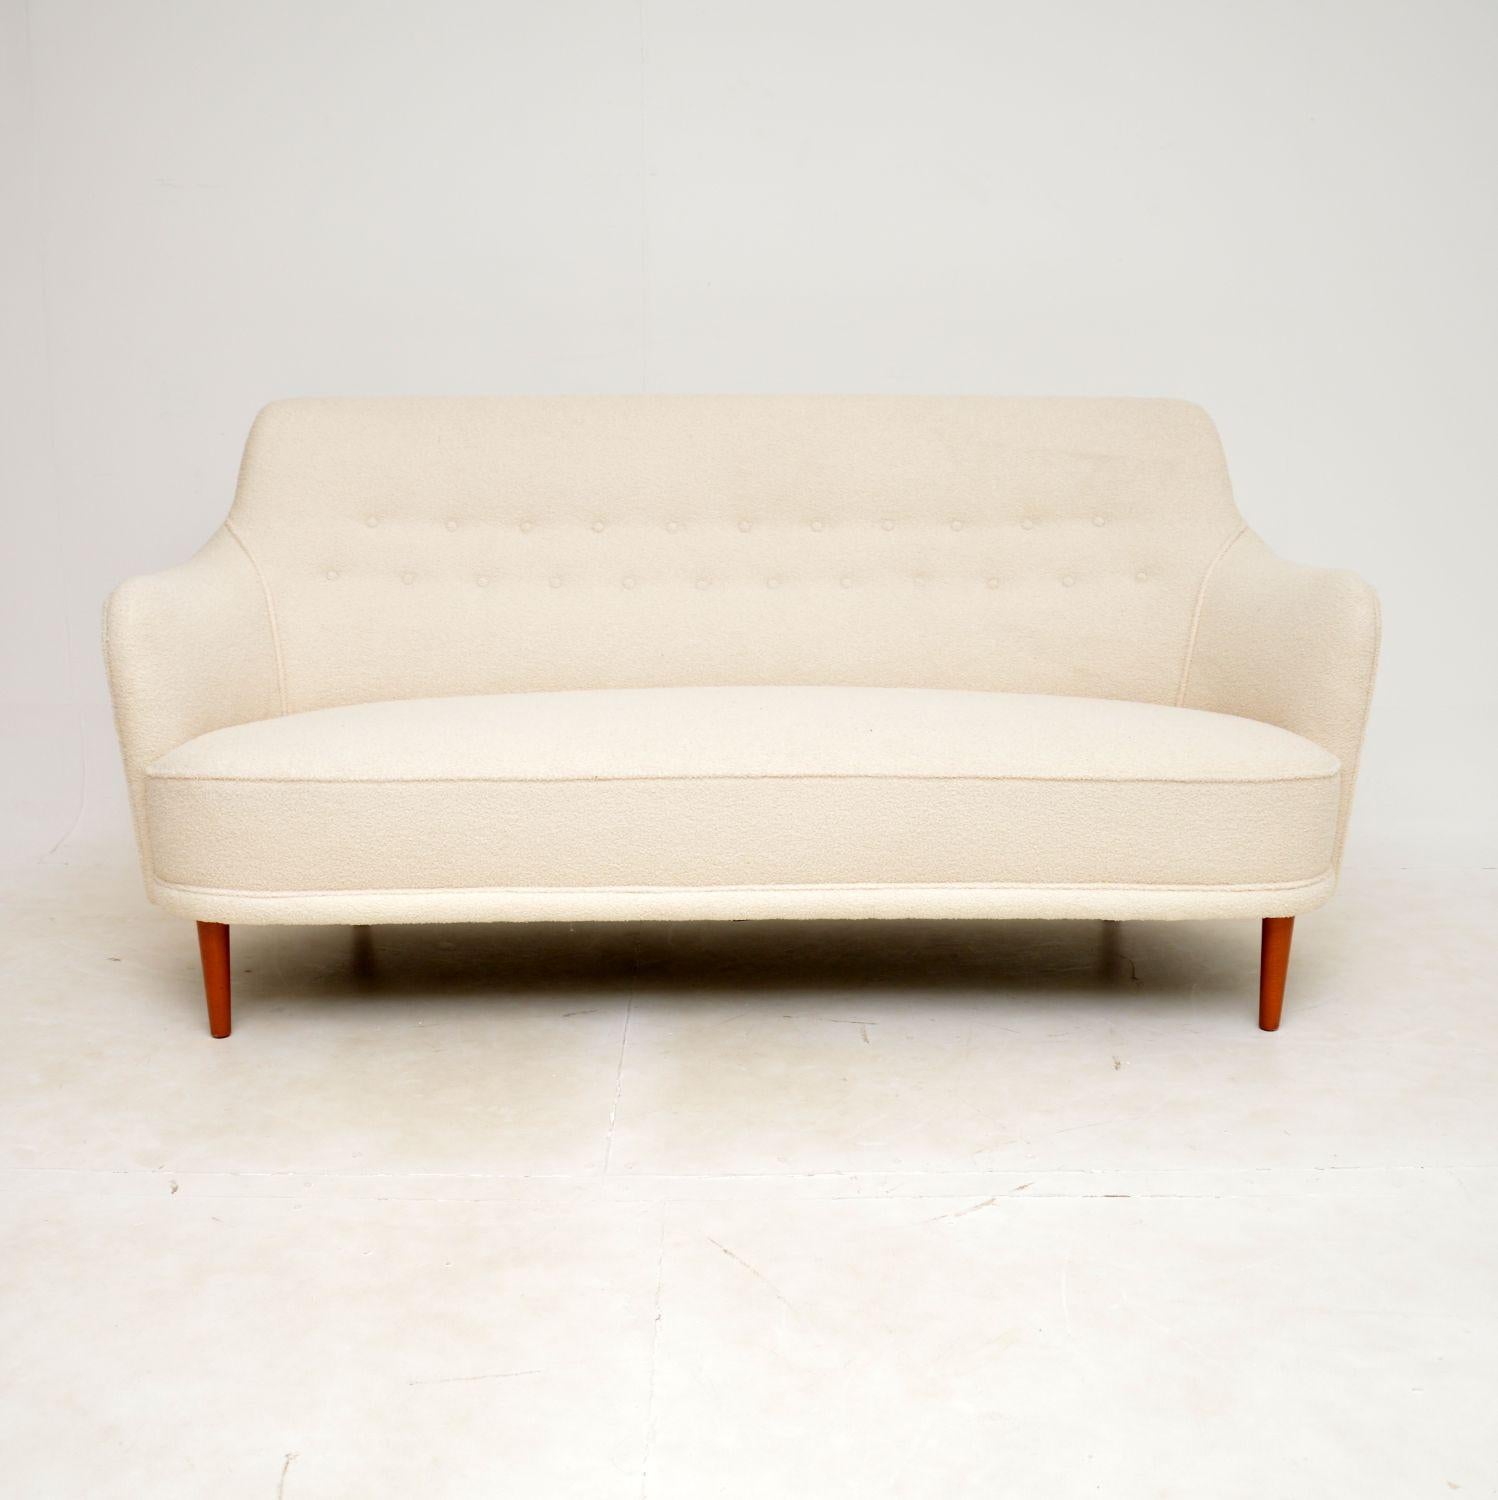 A stunning and extremely comfortable vintage Swedish sofa. This design is called the ‘Samsas’ sofa, it was designed by Carl Malmsten and dates from the 1960s.

This is of extremely high quality, the well built frame looks amazing from all angles